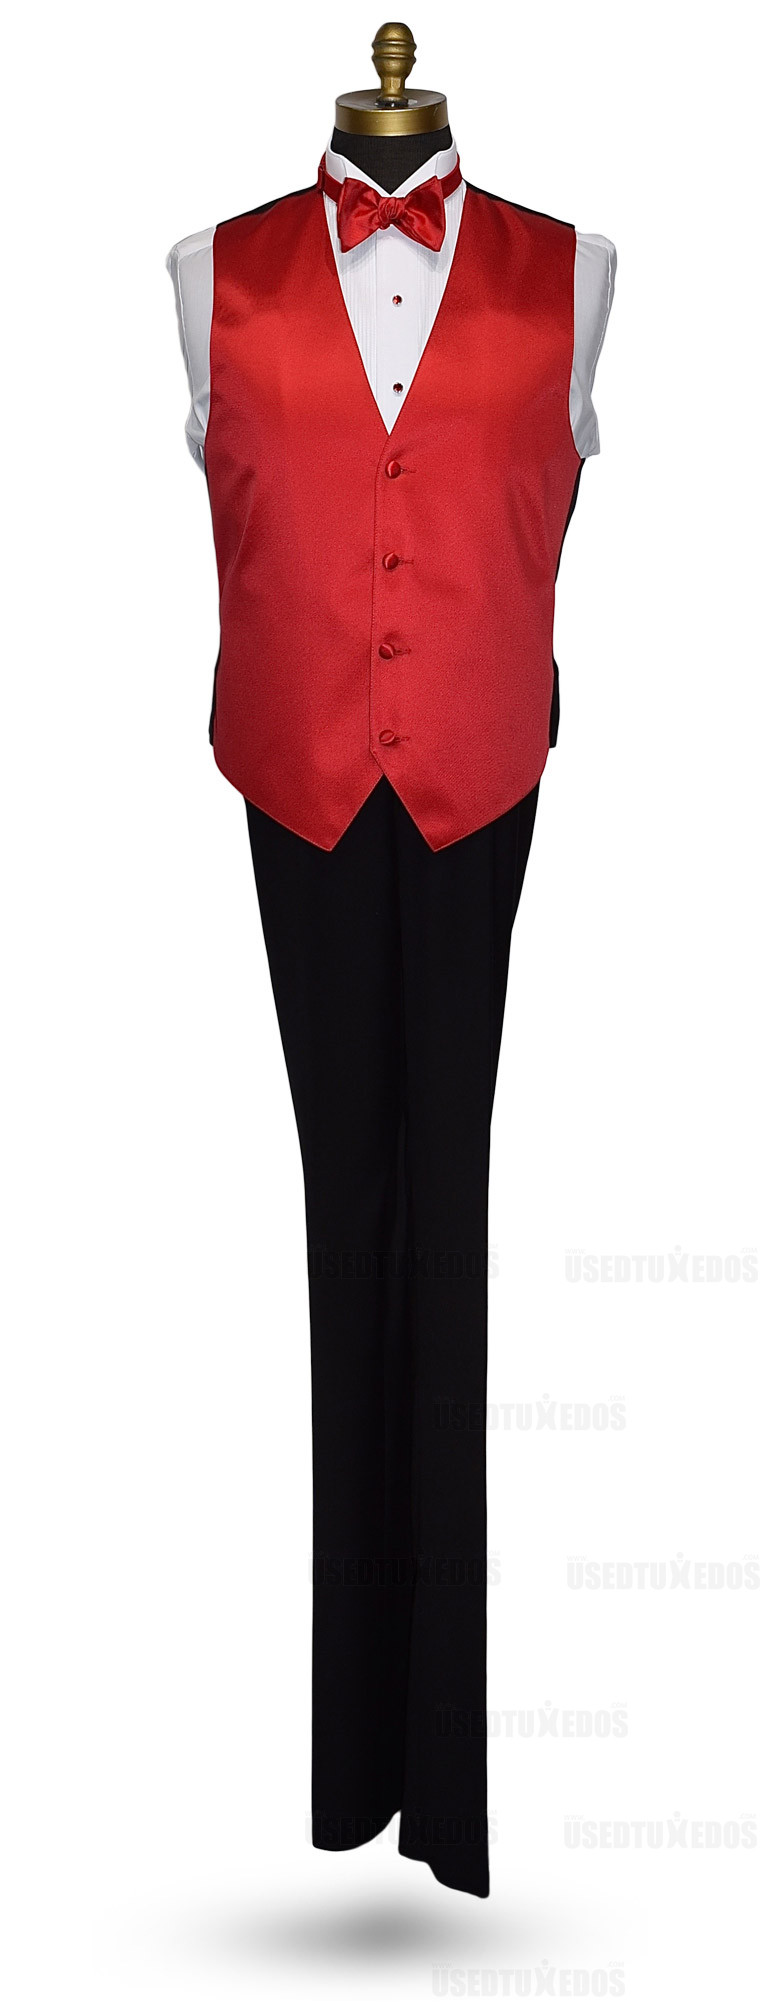 valentina ruby red vest and bowtie for men's tuxedo at tuxbling.com